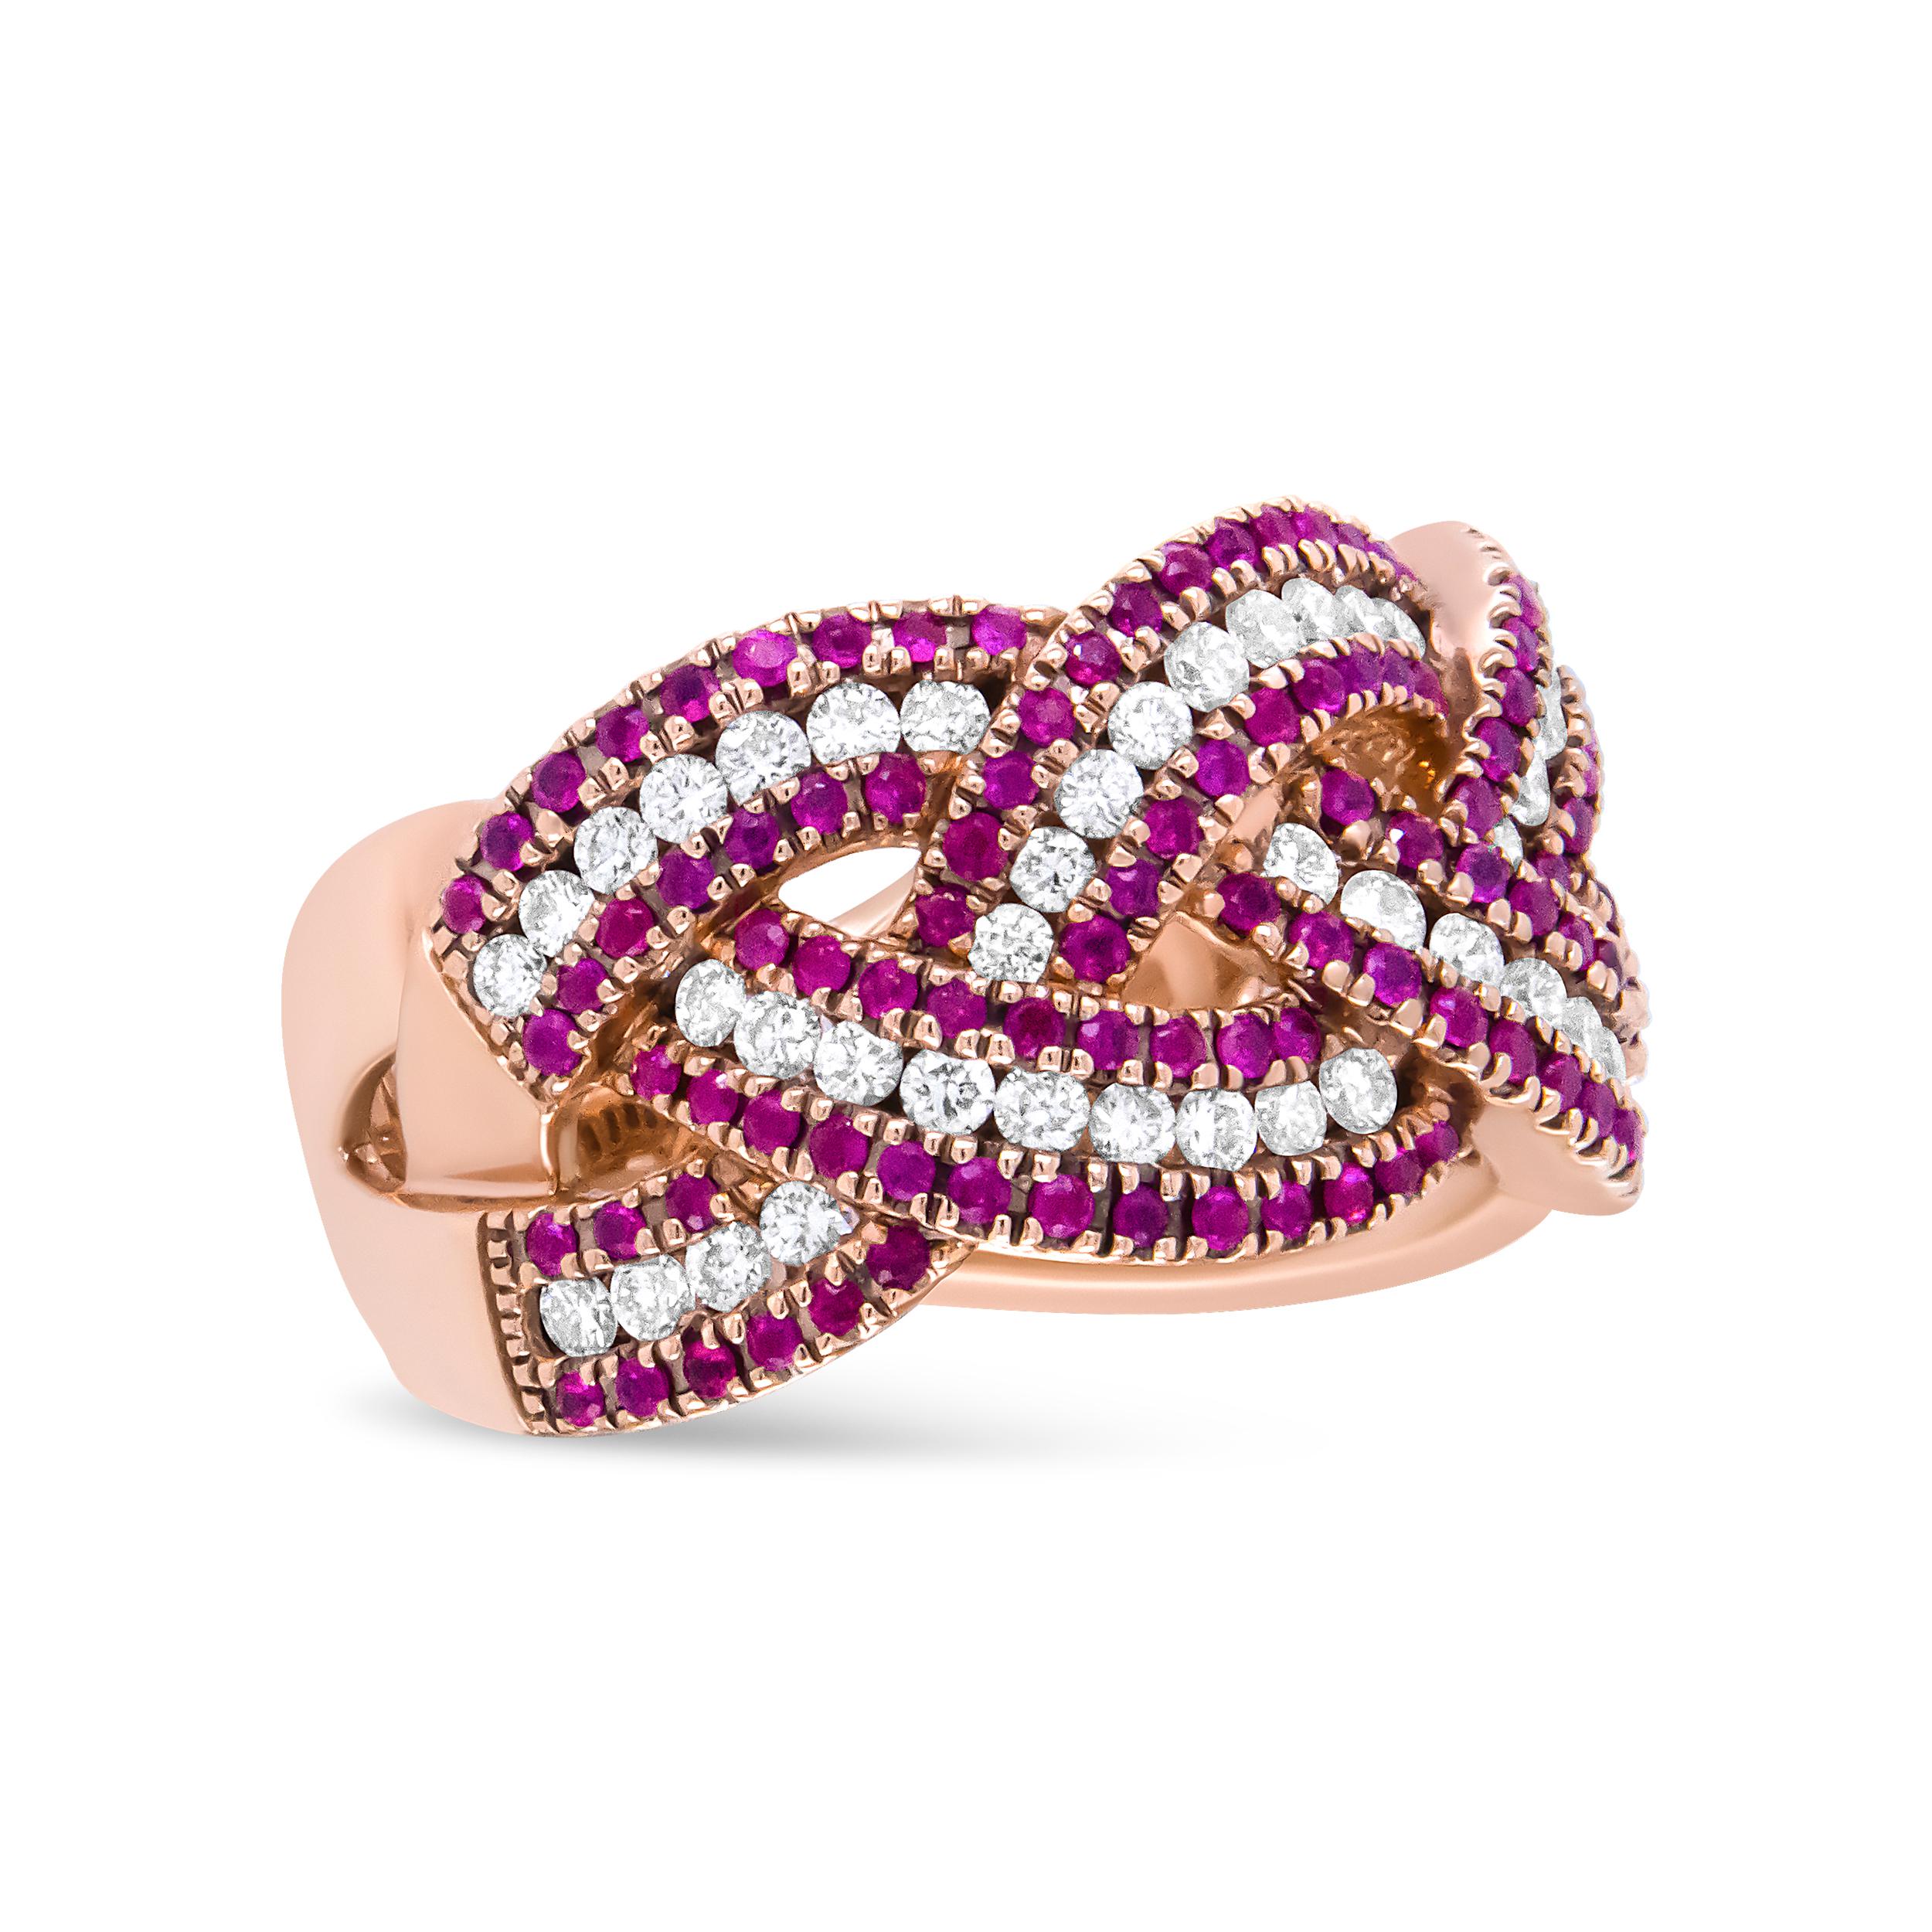 Rubies and diamonds dance delicately across this 18k rose gold band. Crafted with an intricate, bypass design, this ring is set with a total carat weight of 7/8 c.t. Rows of red rubies alternate with rows of natural round-cut white diamonds to give